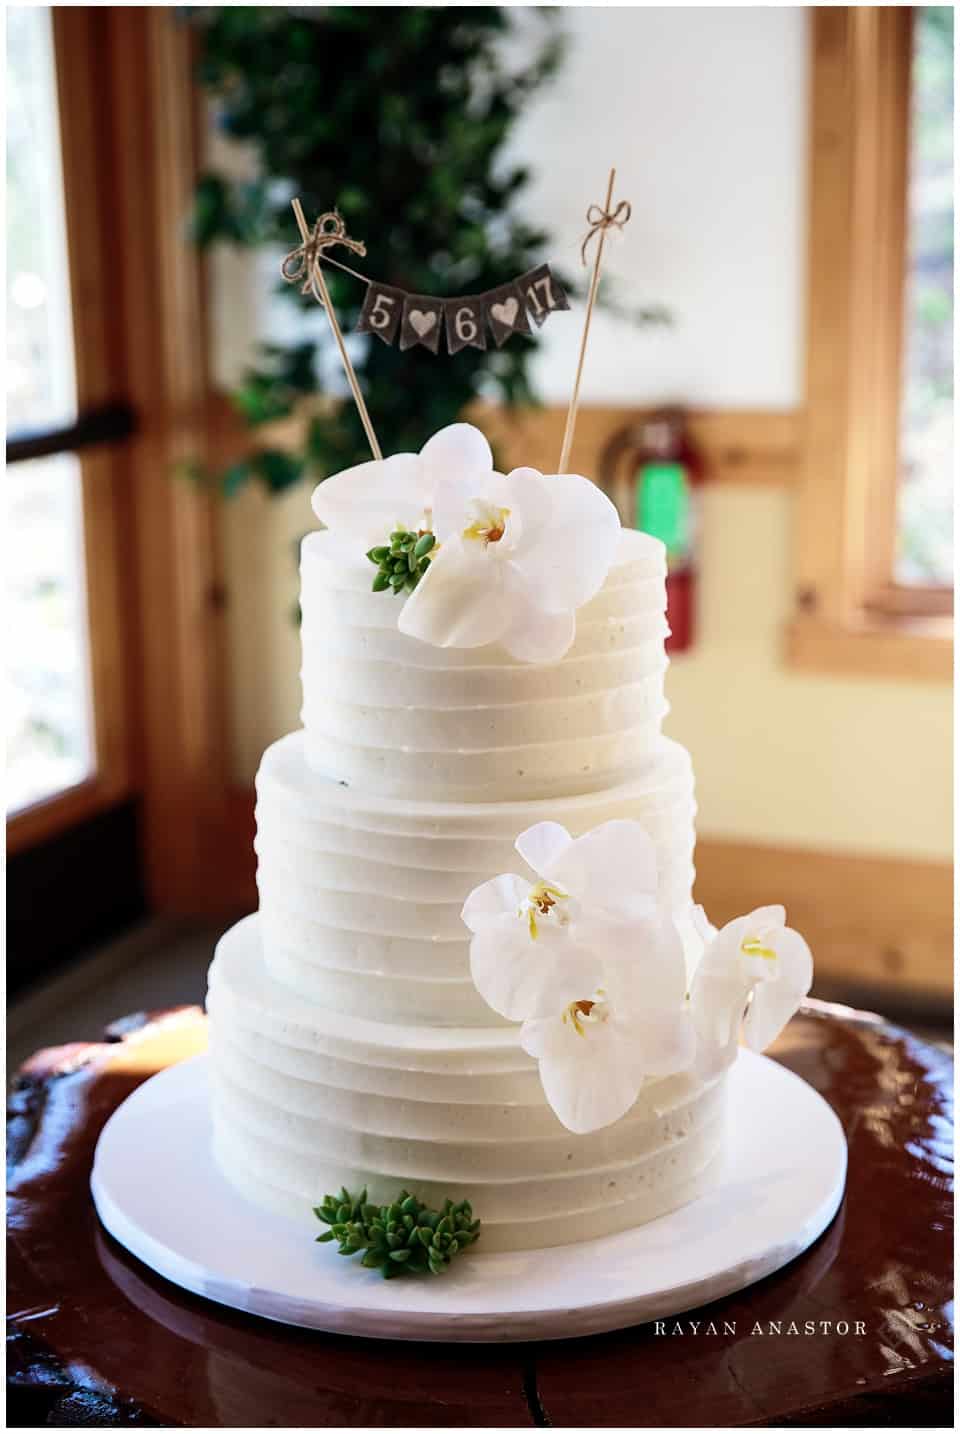 Aunt B's cakes and dessert wedding cake with an orchid